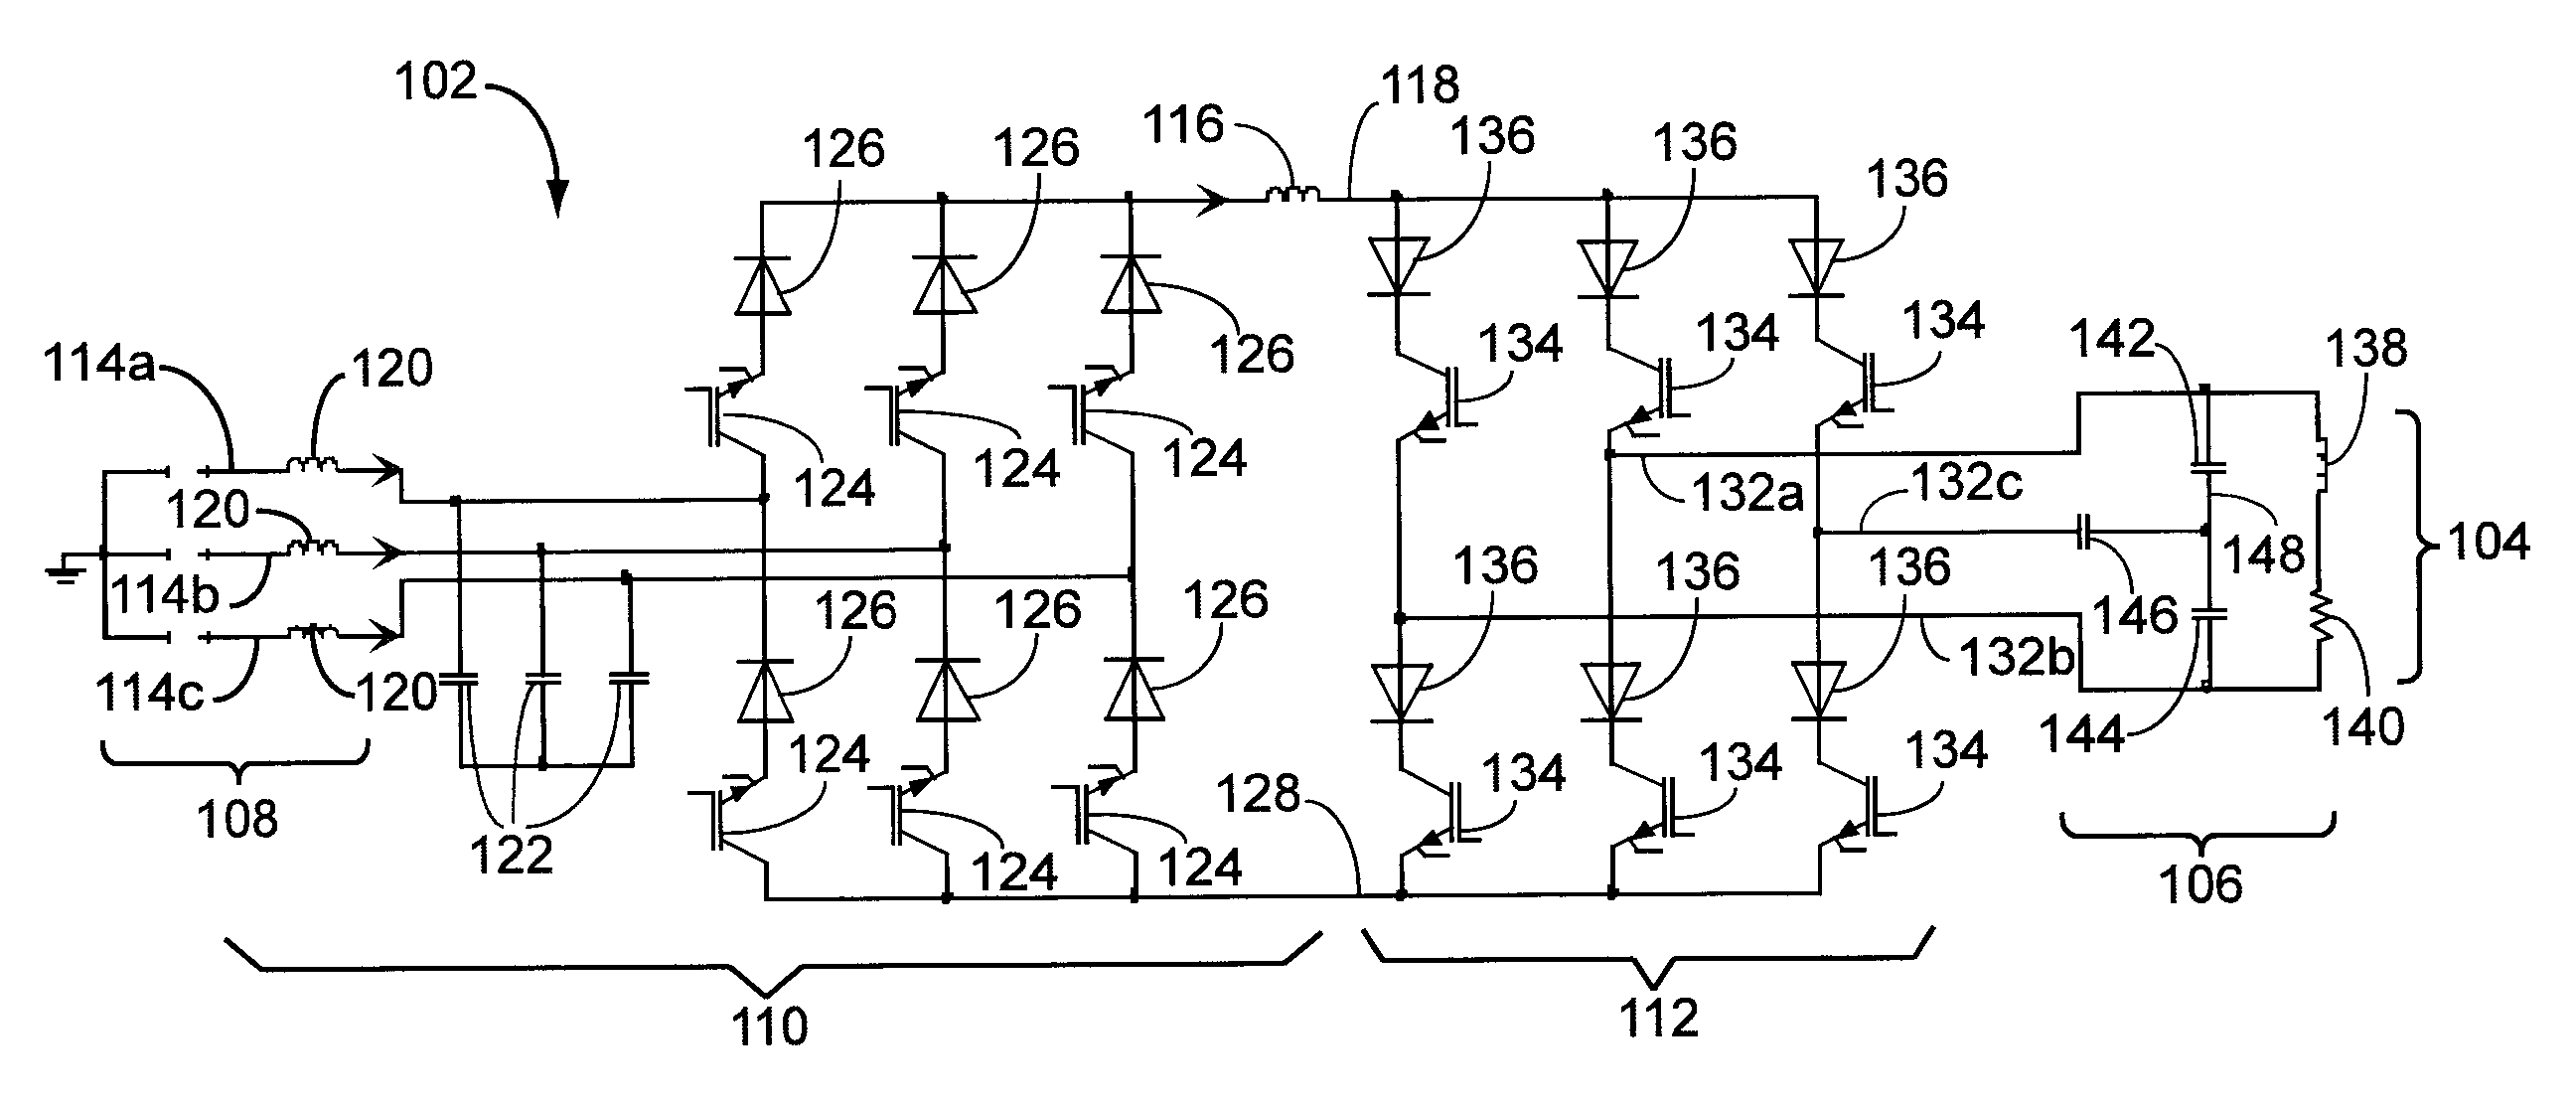 Auxiliary circuit for use with three-phase drive with current source inverter powering a single-phase load